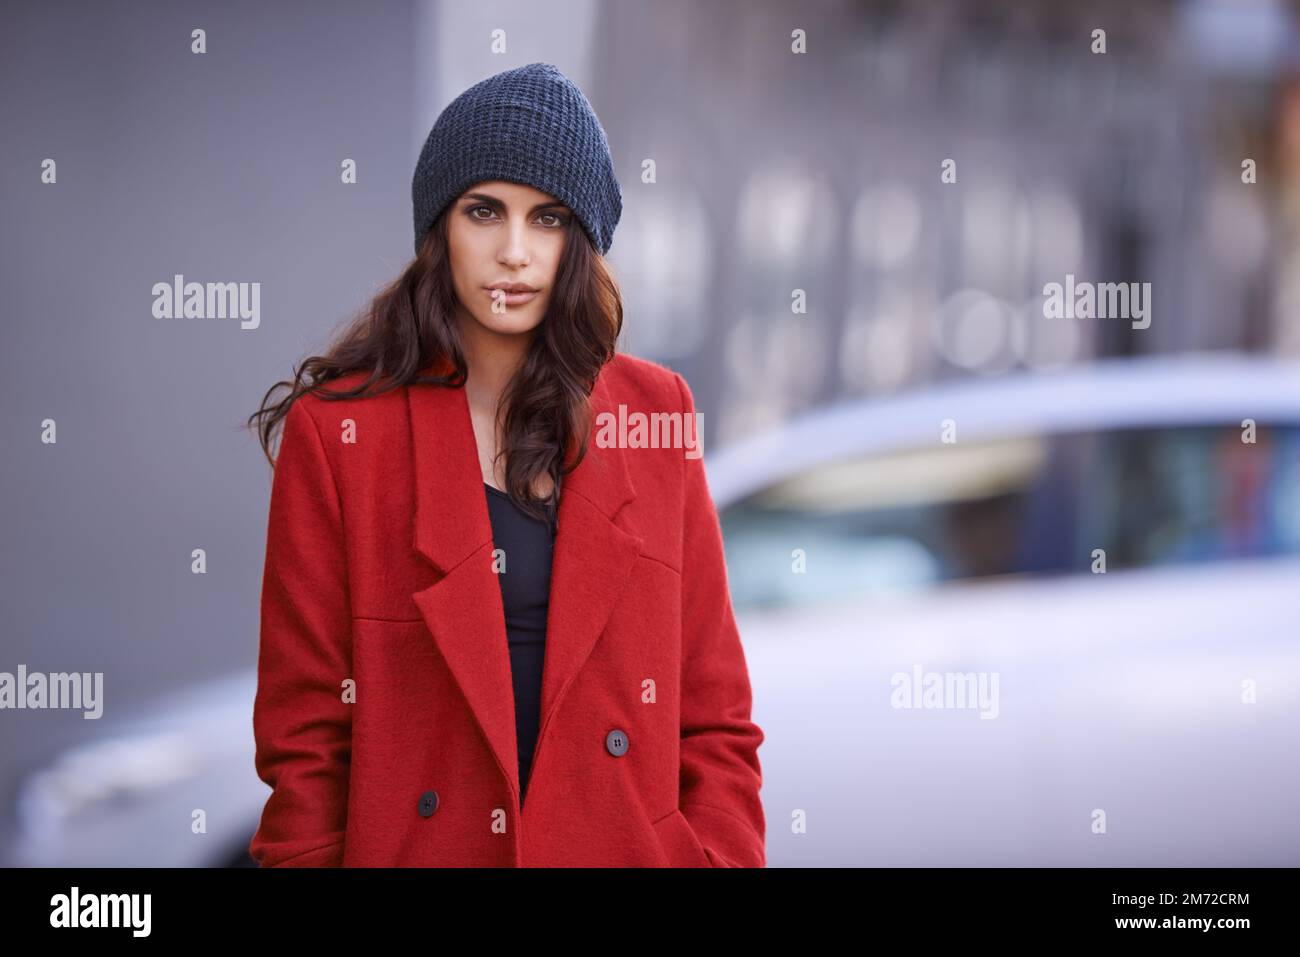 Styled to beat the chill. Cropped portrait of a beautiful young woman wearing a red winter coat and a beanie. Stock Photo